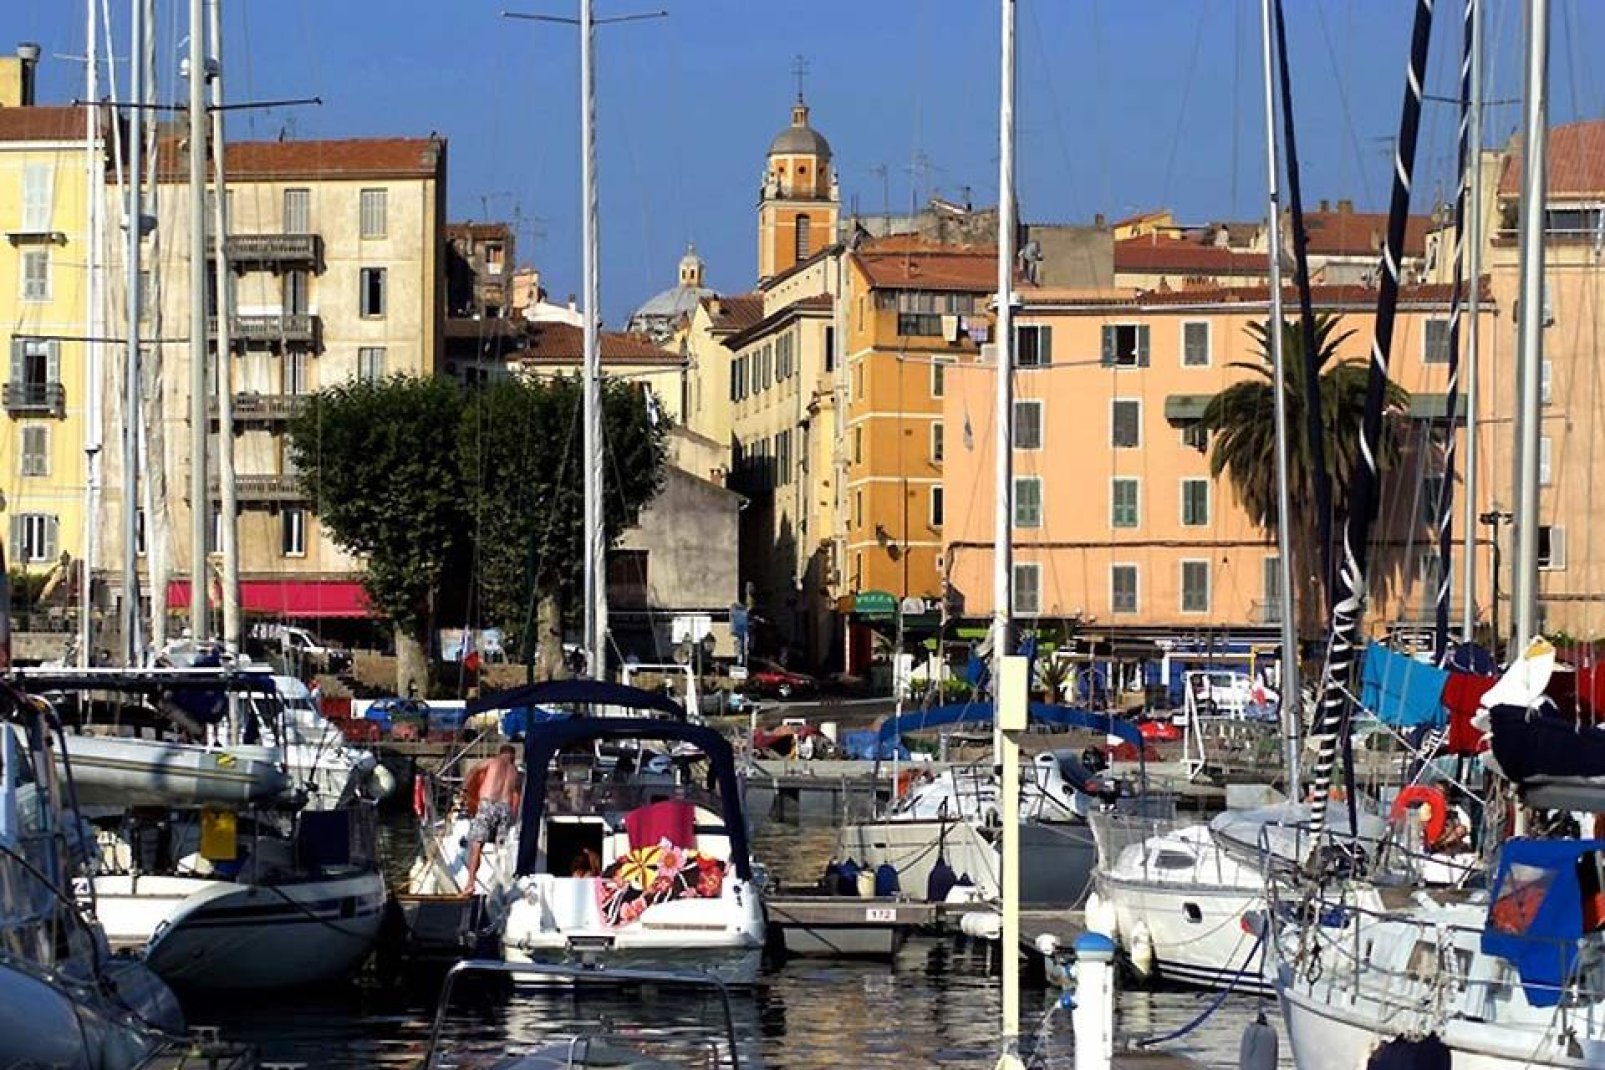 Between its port, its old town and its narrow streets, and its beaches and coves, Ajaccio immerses its visitors in a very pleasant setting.